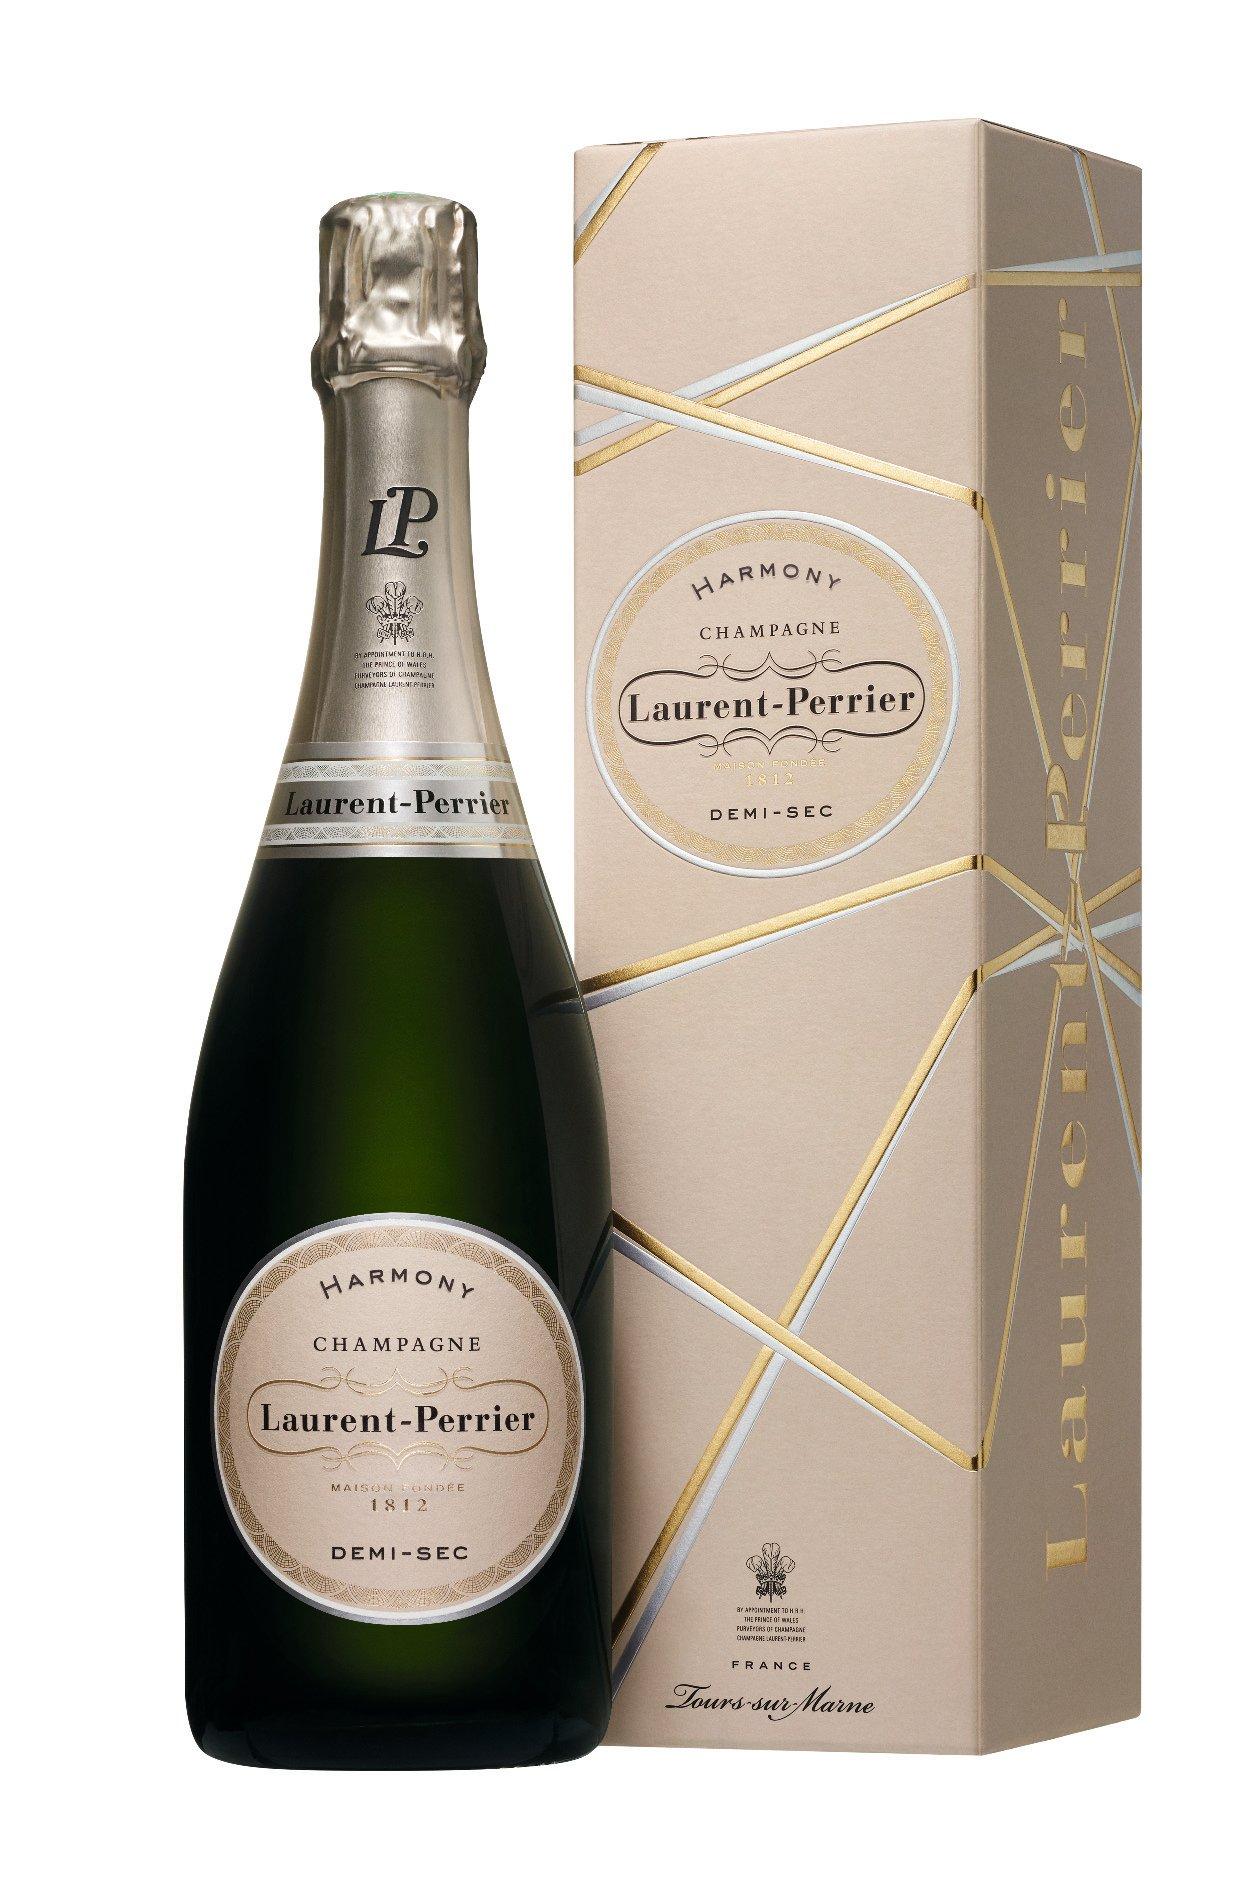 Image of Champagne Laurent-Perrier Harmony demi-sec - 75 cl